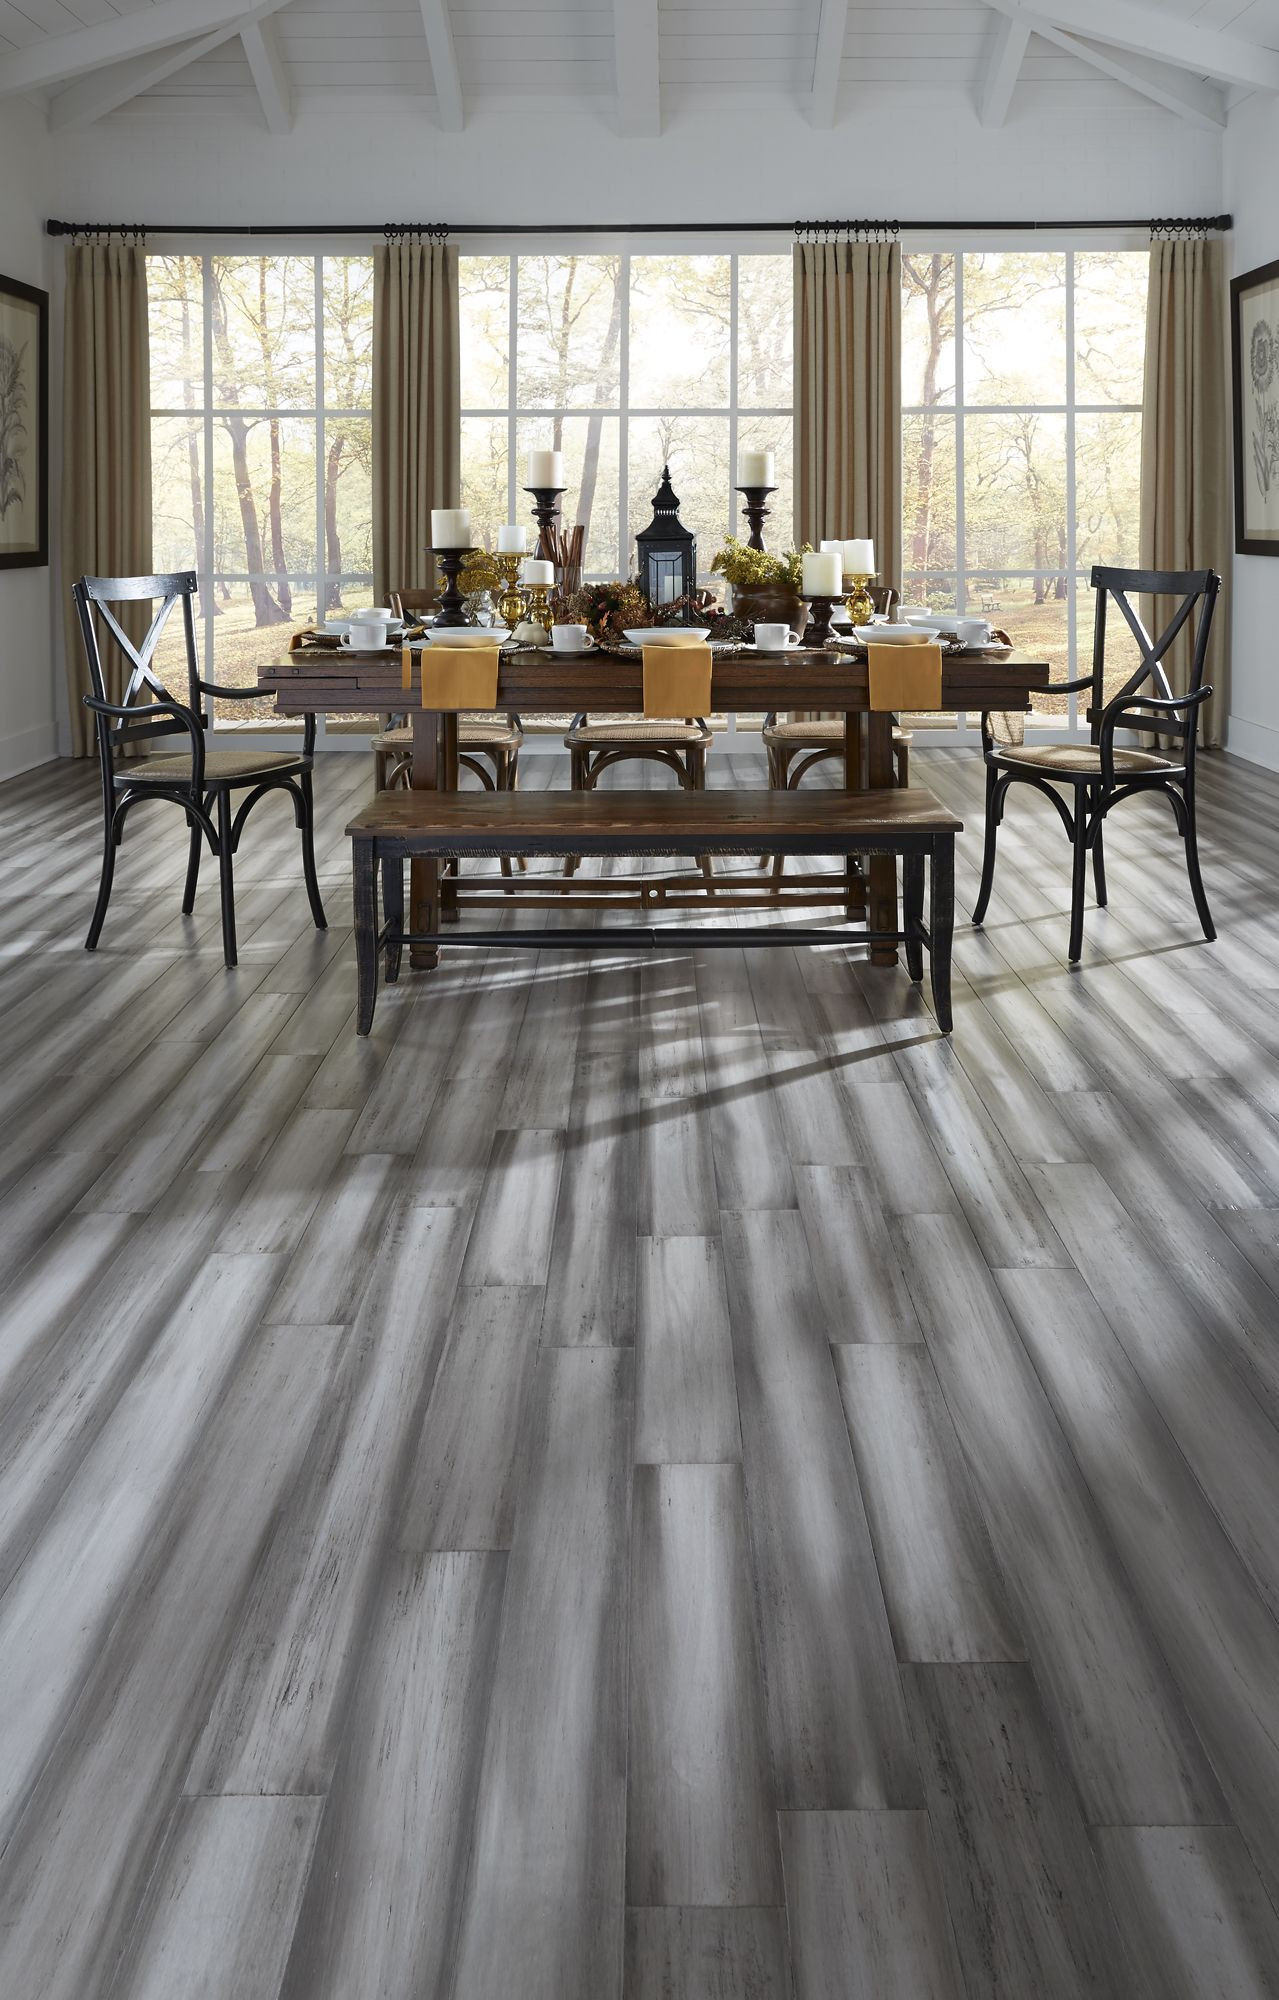 hardwood floor refinishing st louis of cost per square foot to refinish hardwood floors it s ly a paper with regard to cost per square foot to refinish hardwood floors modern design and rustic texture pair perfectly with